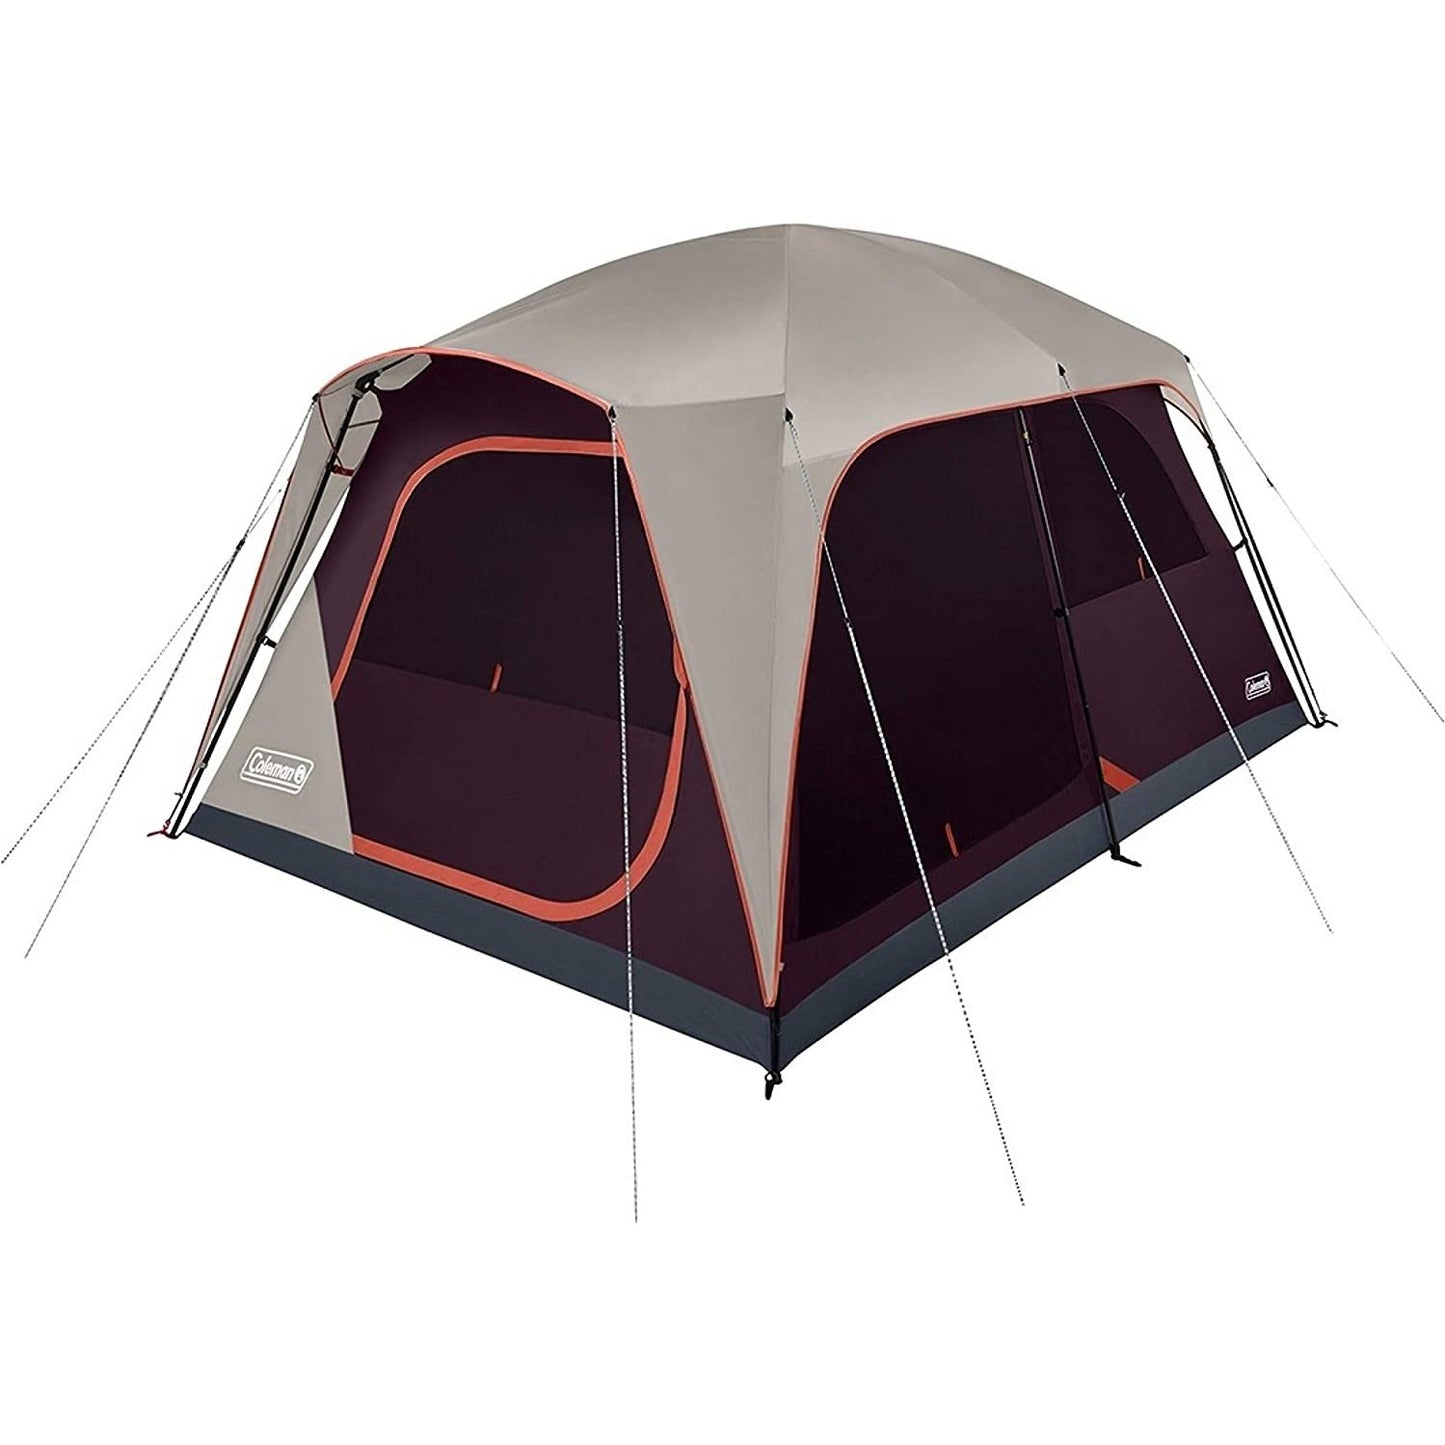 Skylodge™ 8-Person Camping Tent, Blackberry